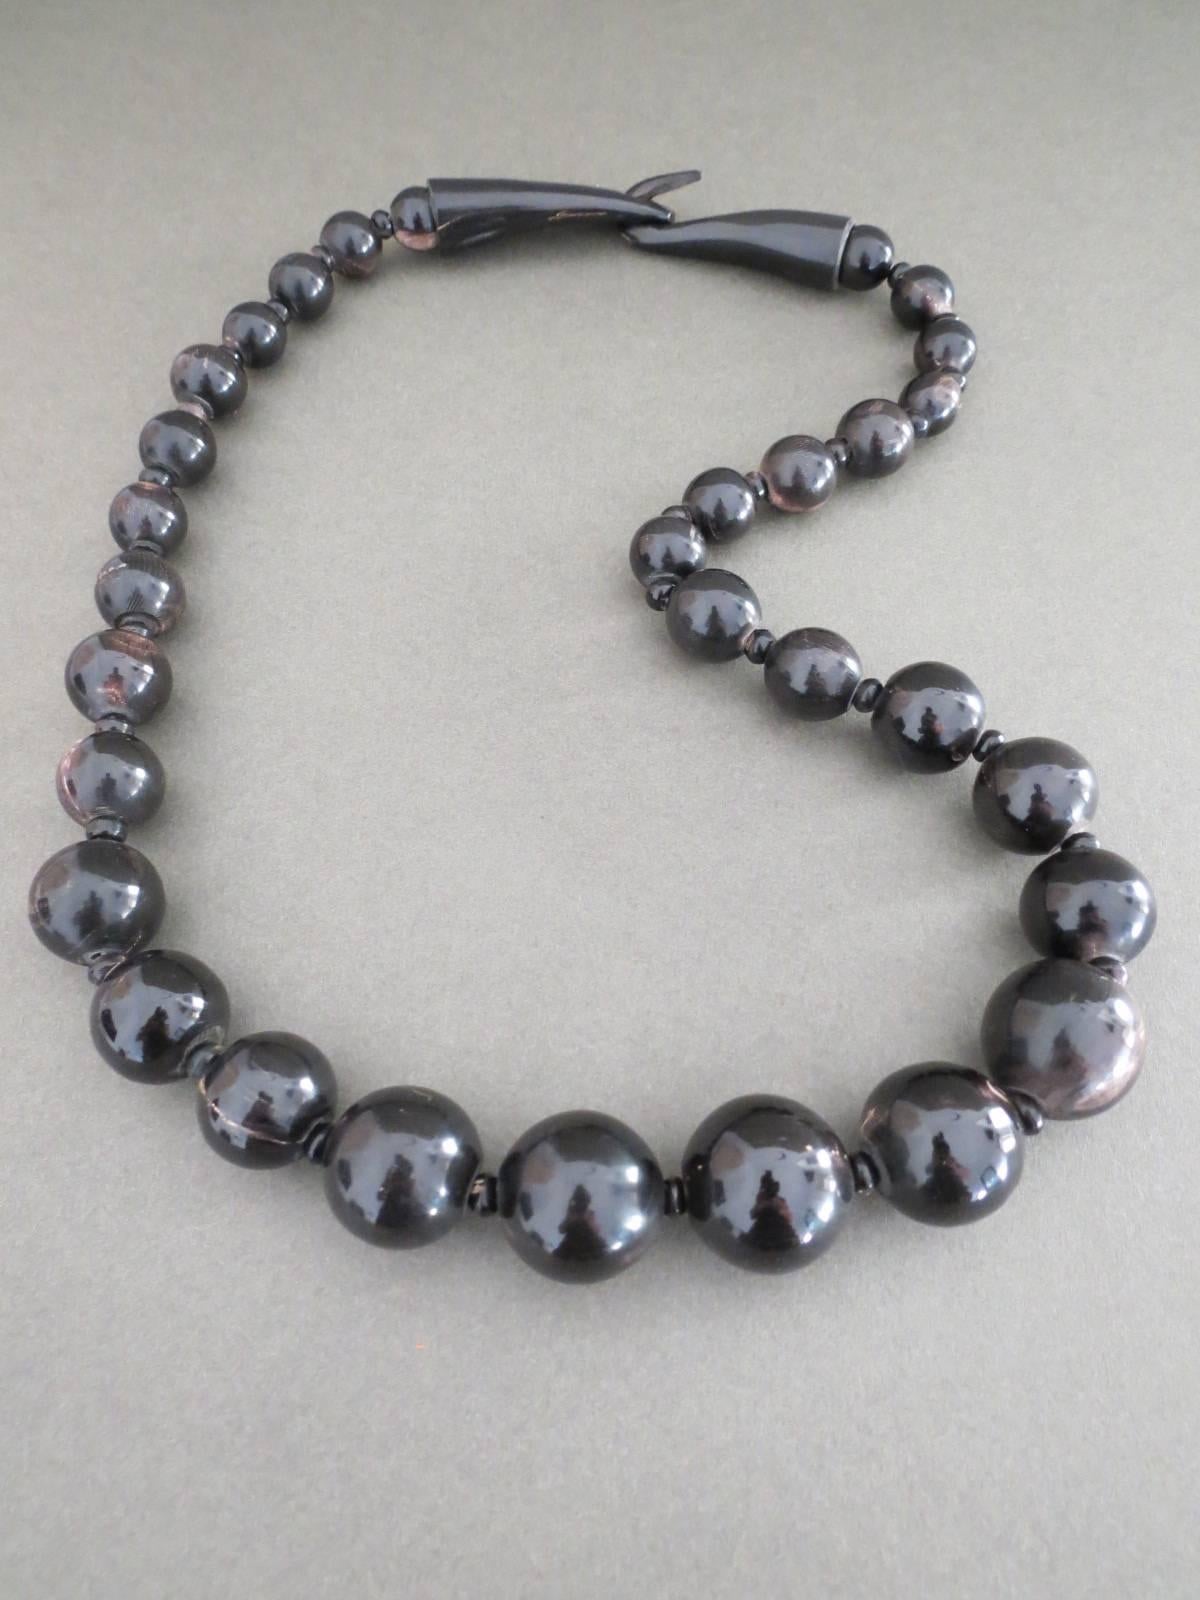 This is lovely Vintage Danish Monies necklace designed by Gerda Lynggaard . The necklace is made of bovine horn.
Item Specifics
Length: 77cm (approx 30.00